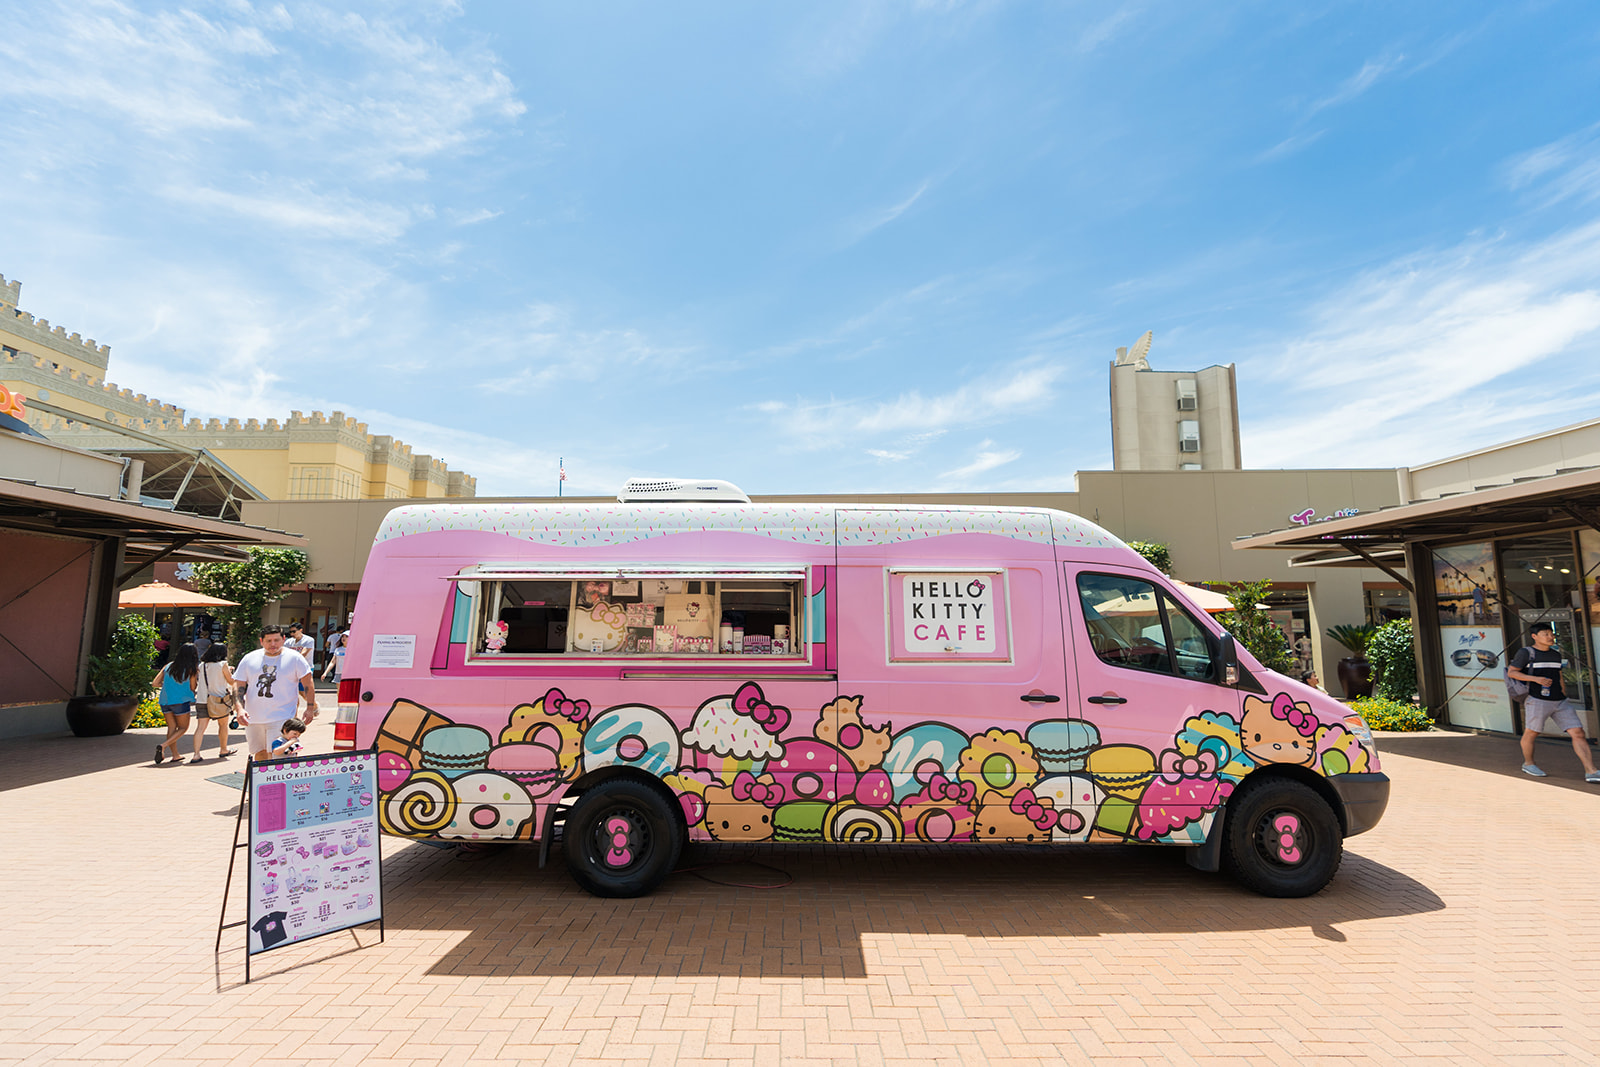 Hello Kitty Cafe truck visiting 5 Texas cities, including Houston